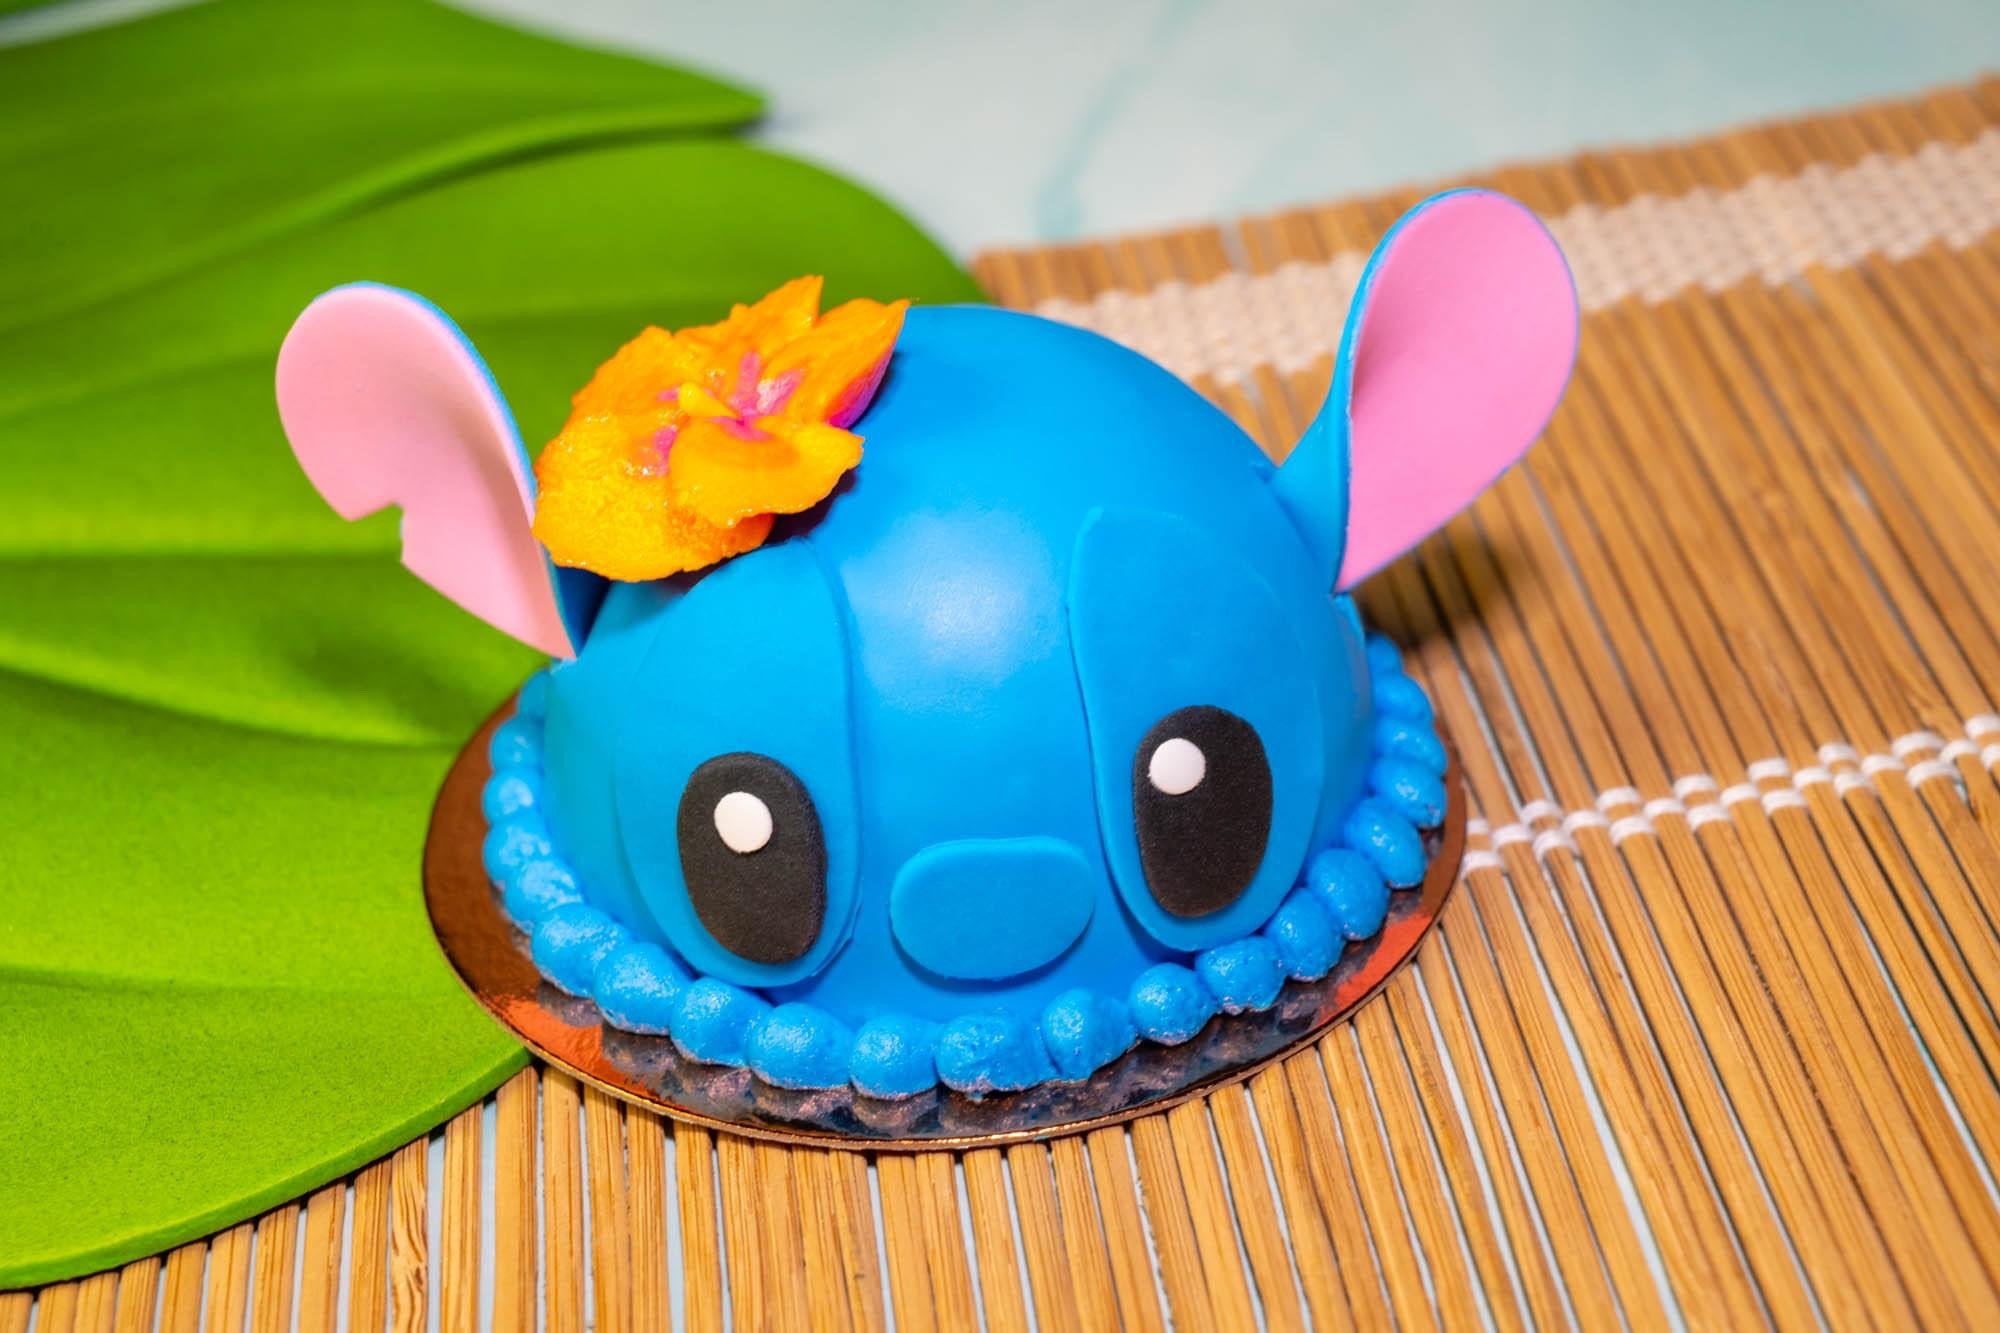 New Tropical Stitch Merchandise Collection Available at Disneyland Resort -  Disneyland News Today